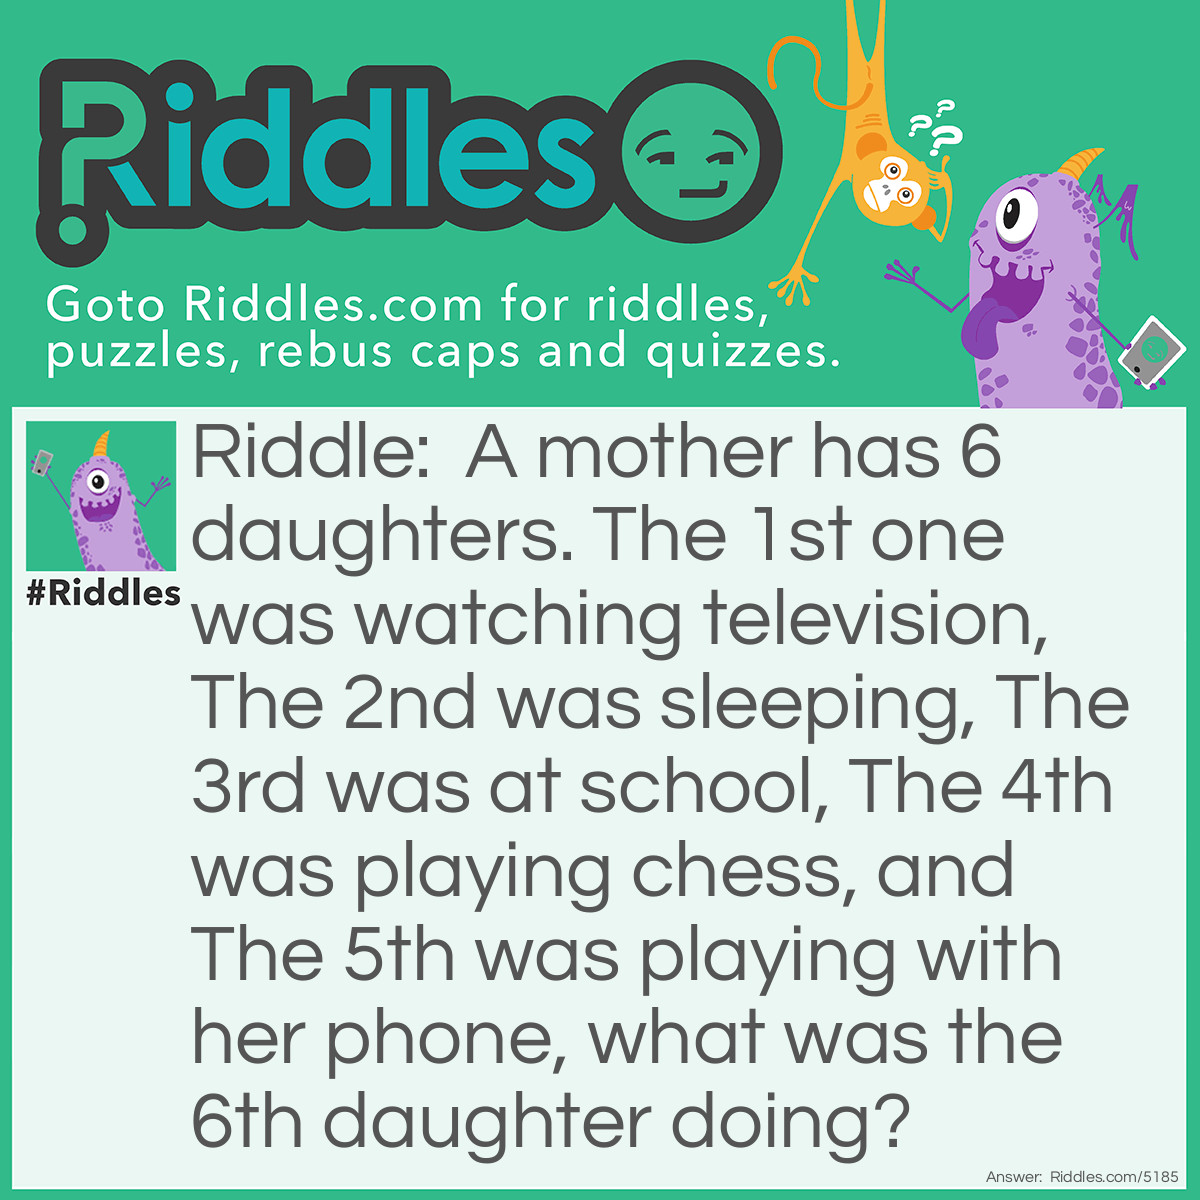 Riddle: A mother has 6 daughters. The 1st one was watching television, The 2nd was sleeping, The 3rd was at school, The 4th was playing chess, The 5th was playing his phone, what was the 6th daughter doing? Answer: Playing chess with the 4th daughter!